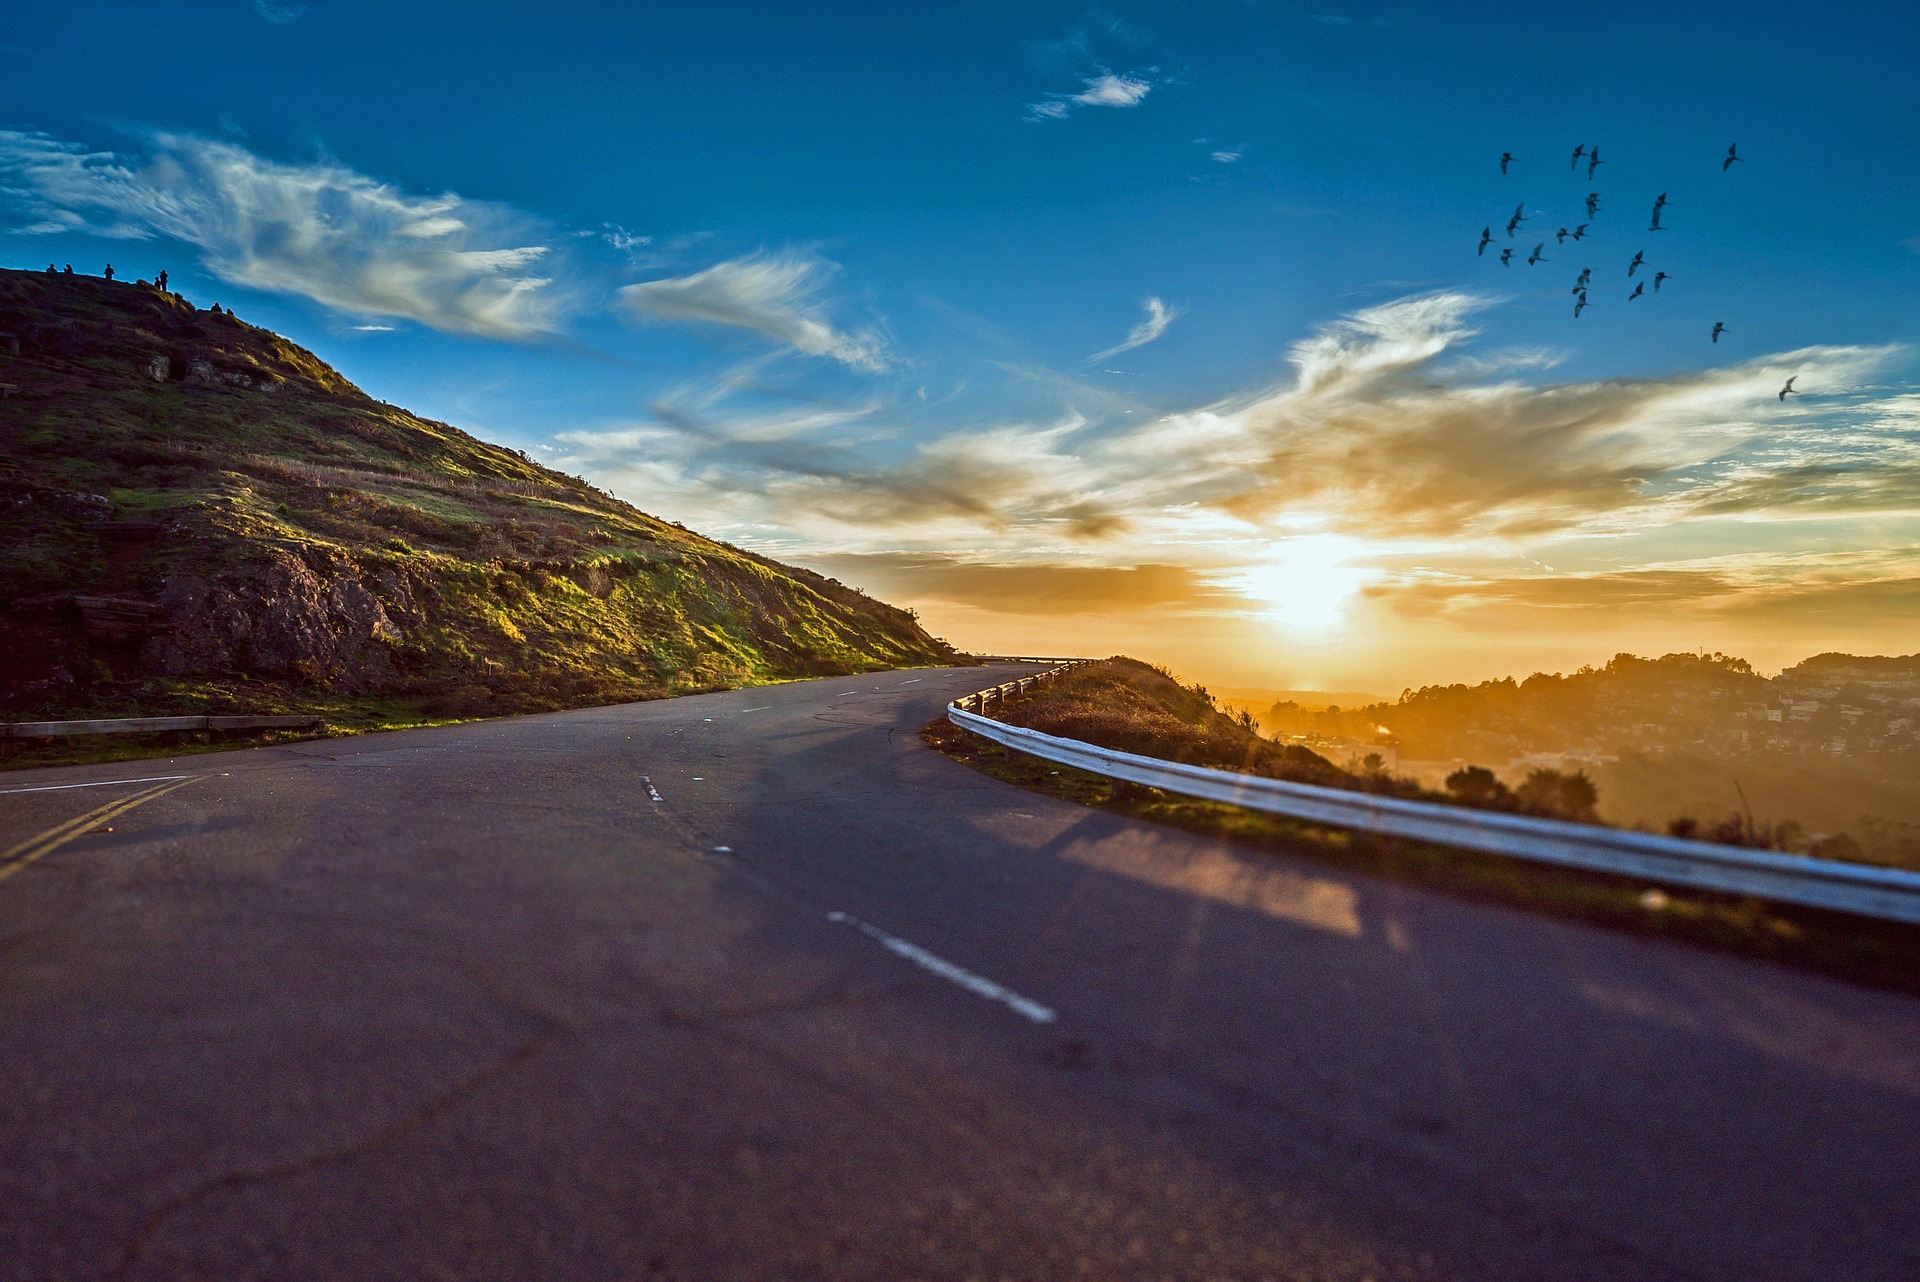 Delivering software solutions better and faster – Part 1: The Roadmap